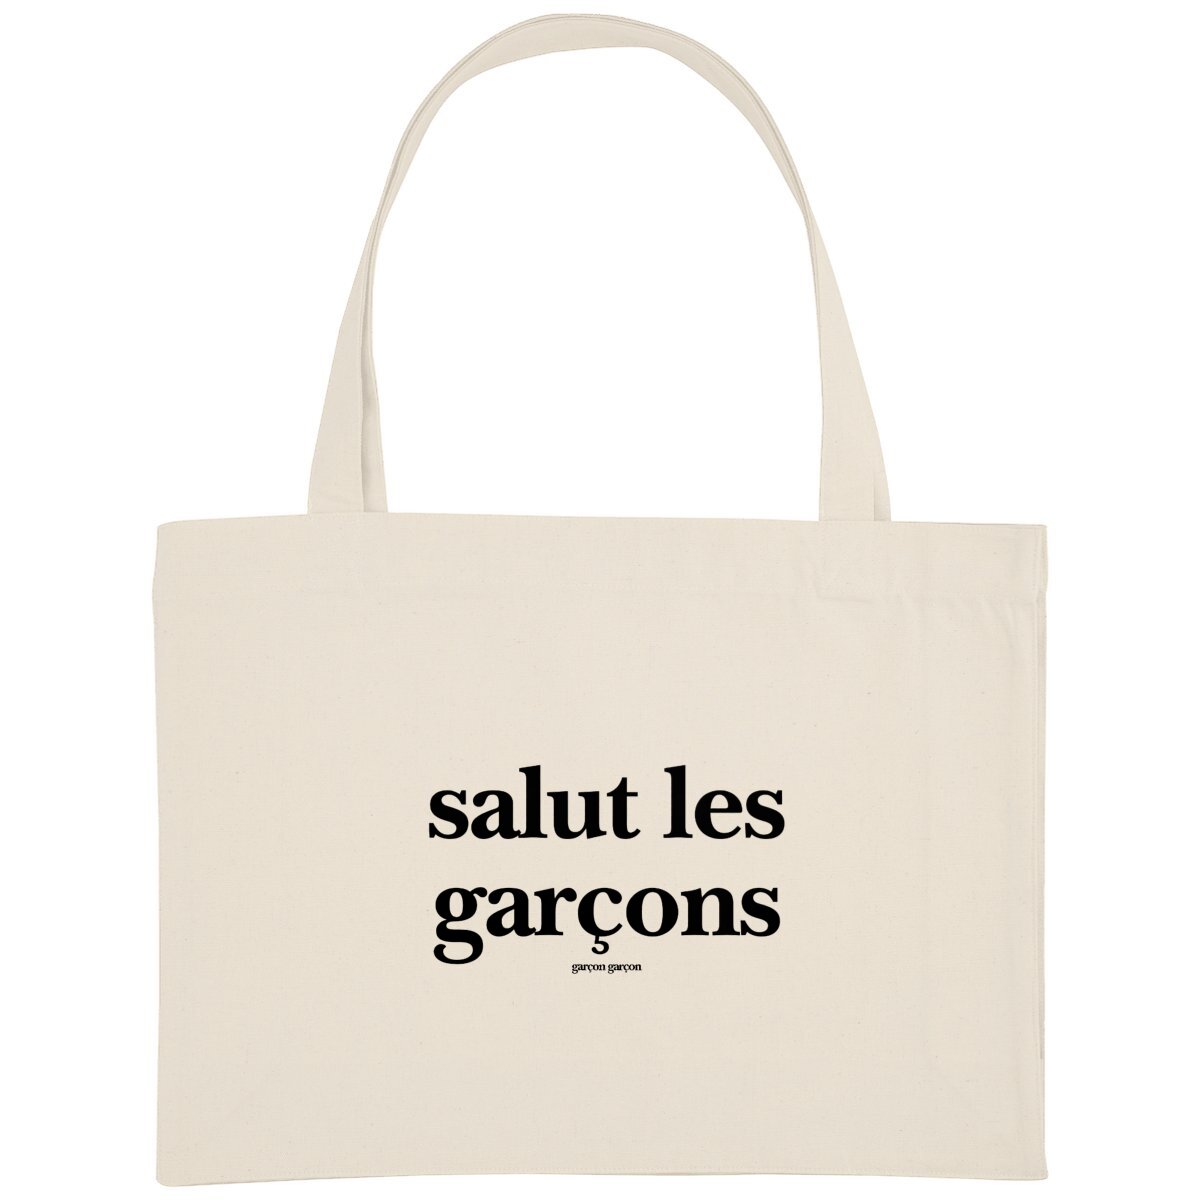 salut les garçons totebag. An eco-friendly cream-colored tote bag featuring the bold statement 'salut les garçons' in black typography, with the brand name 'garçon garçon' subtly placed underneath. A modern accessory that carries more than just your essentials—it carries a message of love and equality.